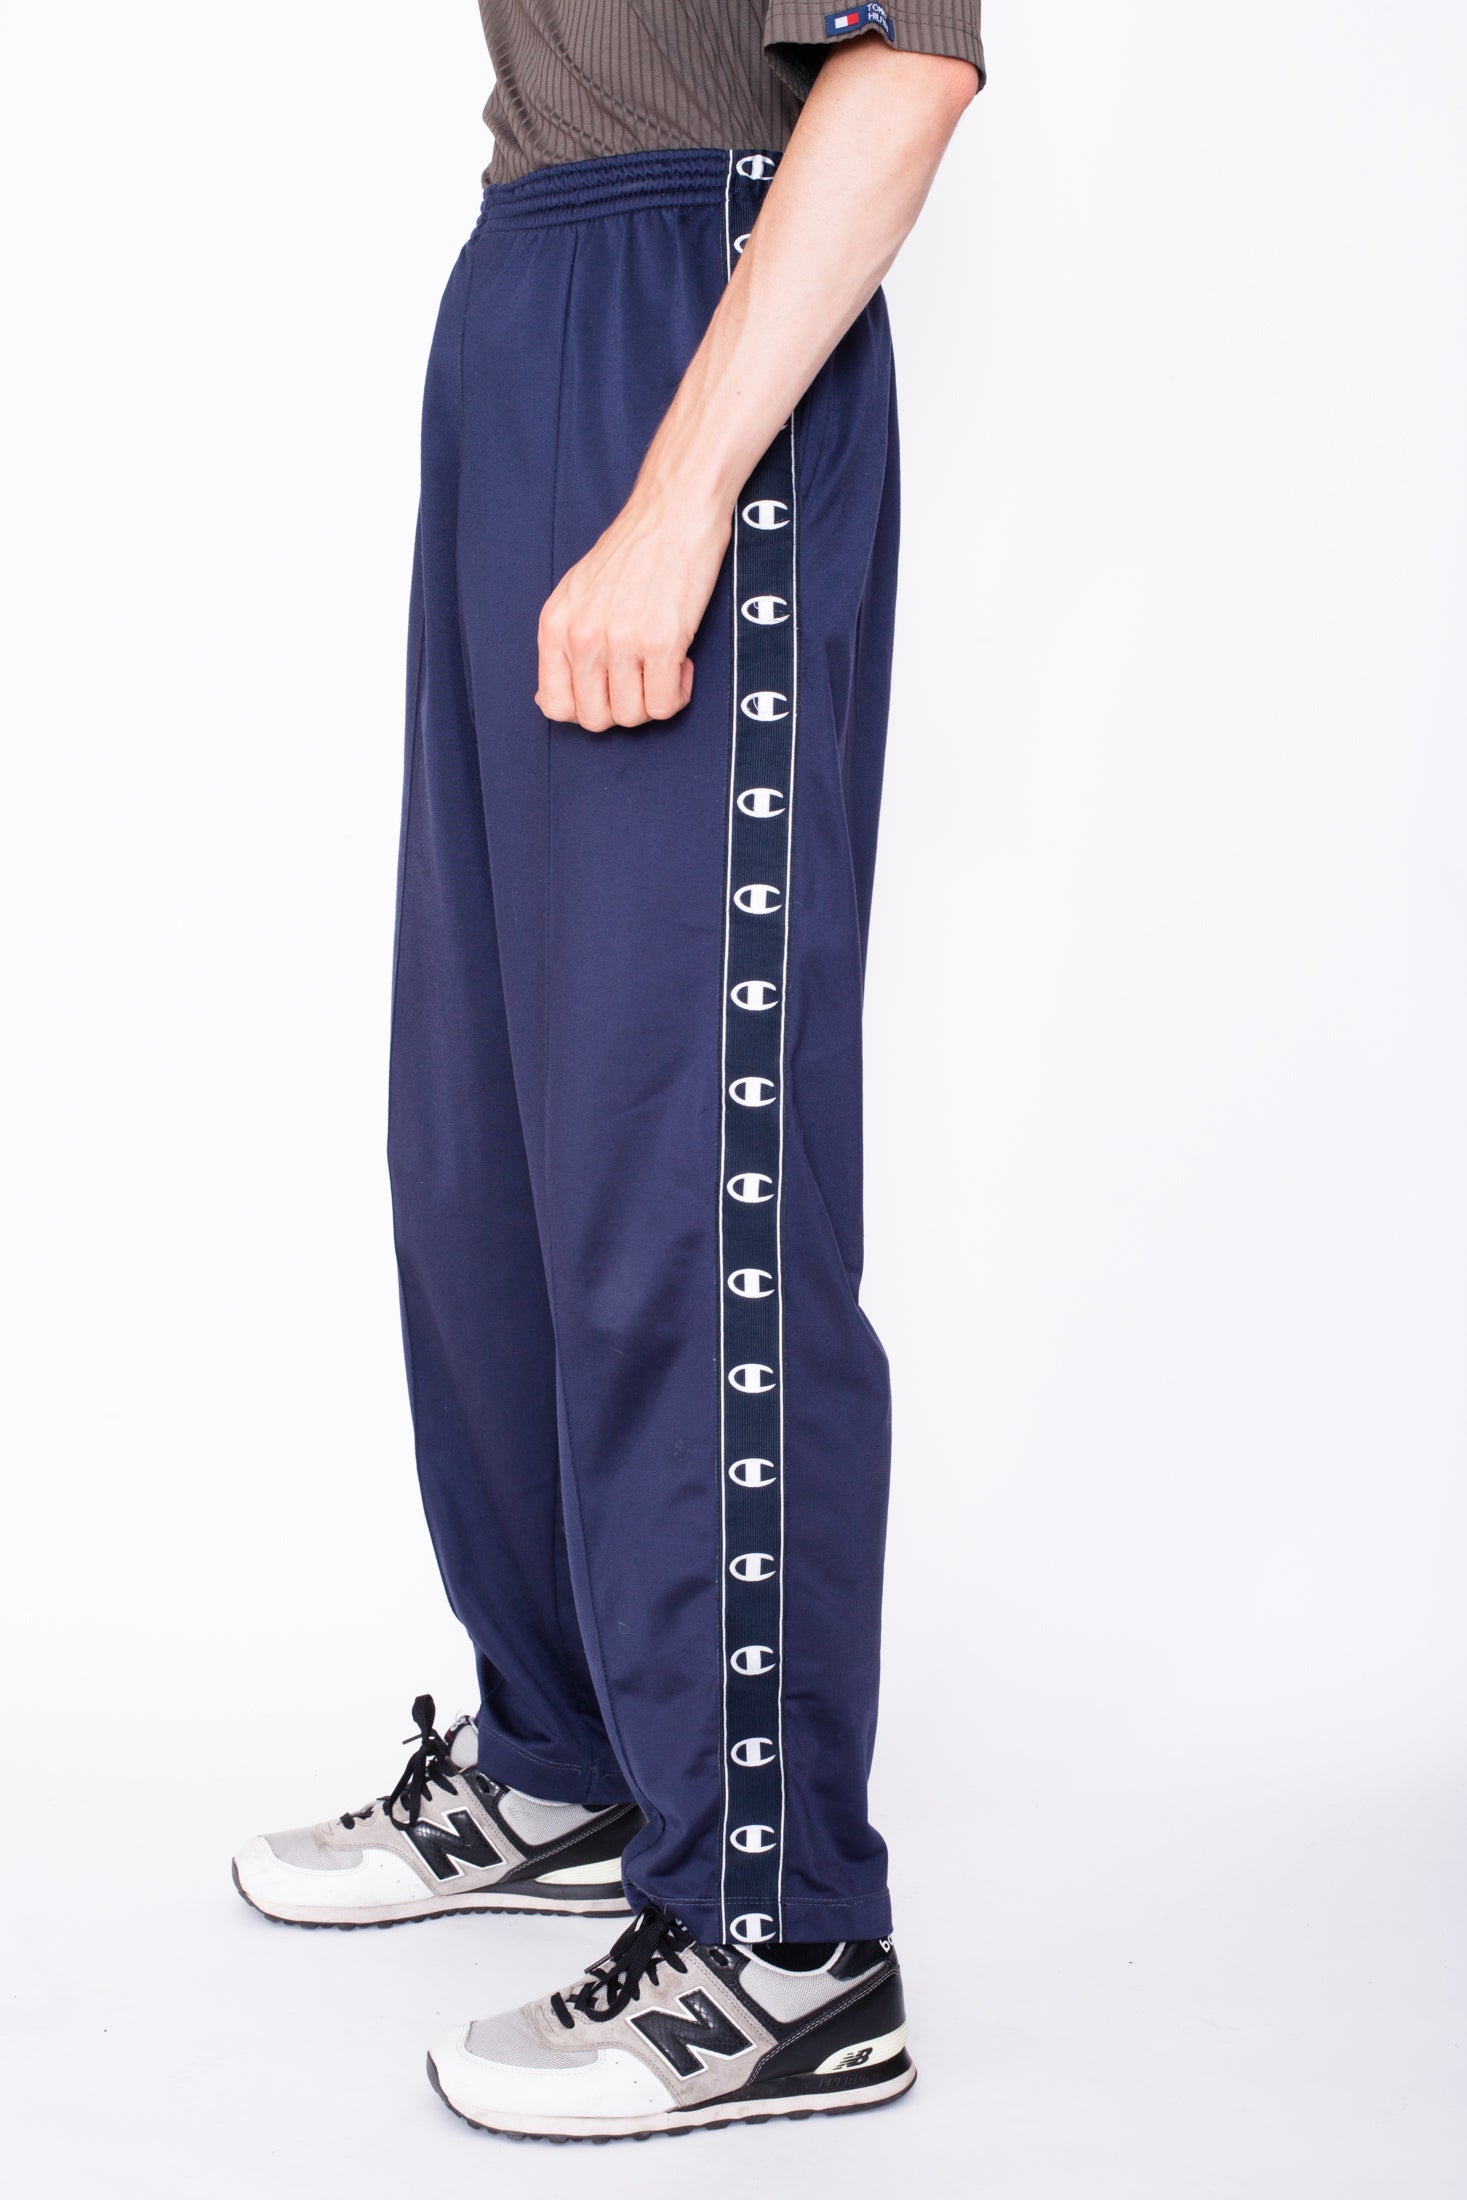 Buy Black Solid Parallel Pants With Embroidery Online - Shop for W